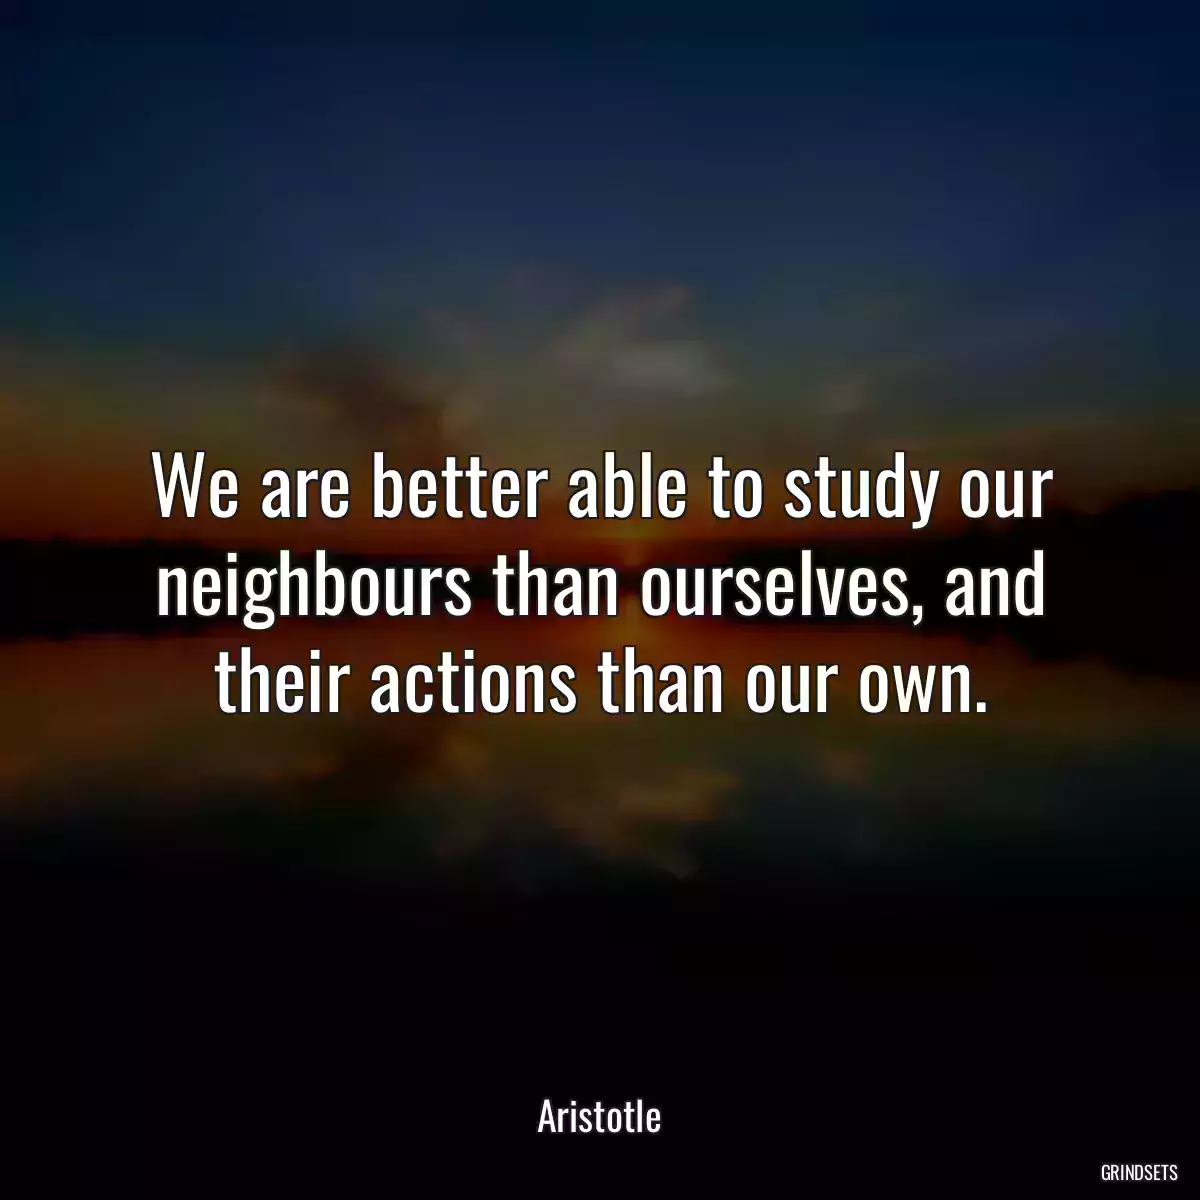 We are better able to study our neighbours than ourselves, and their actions than our own.